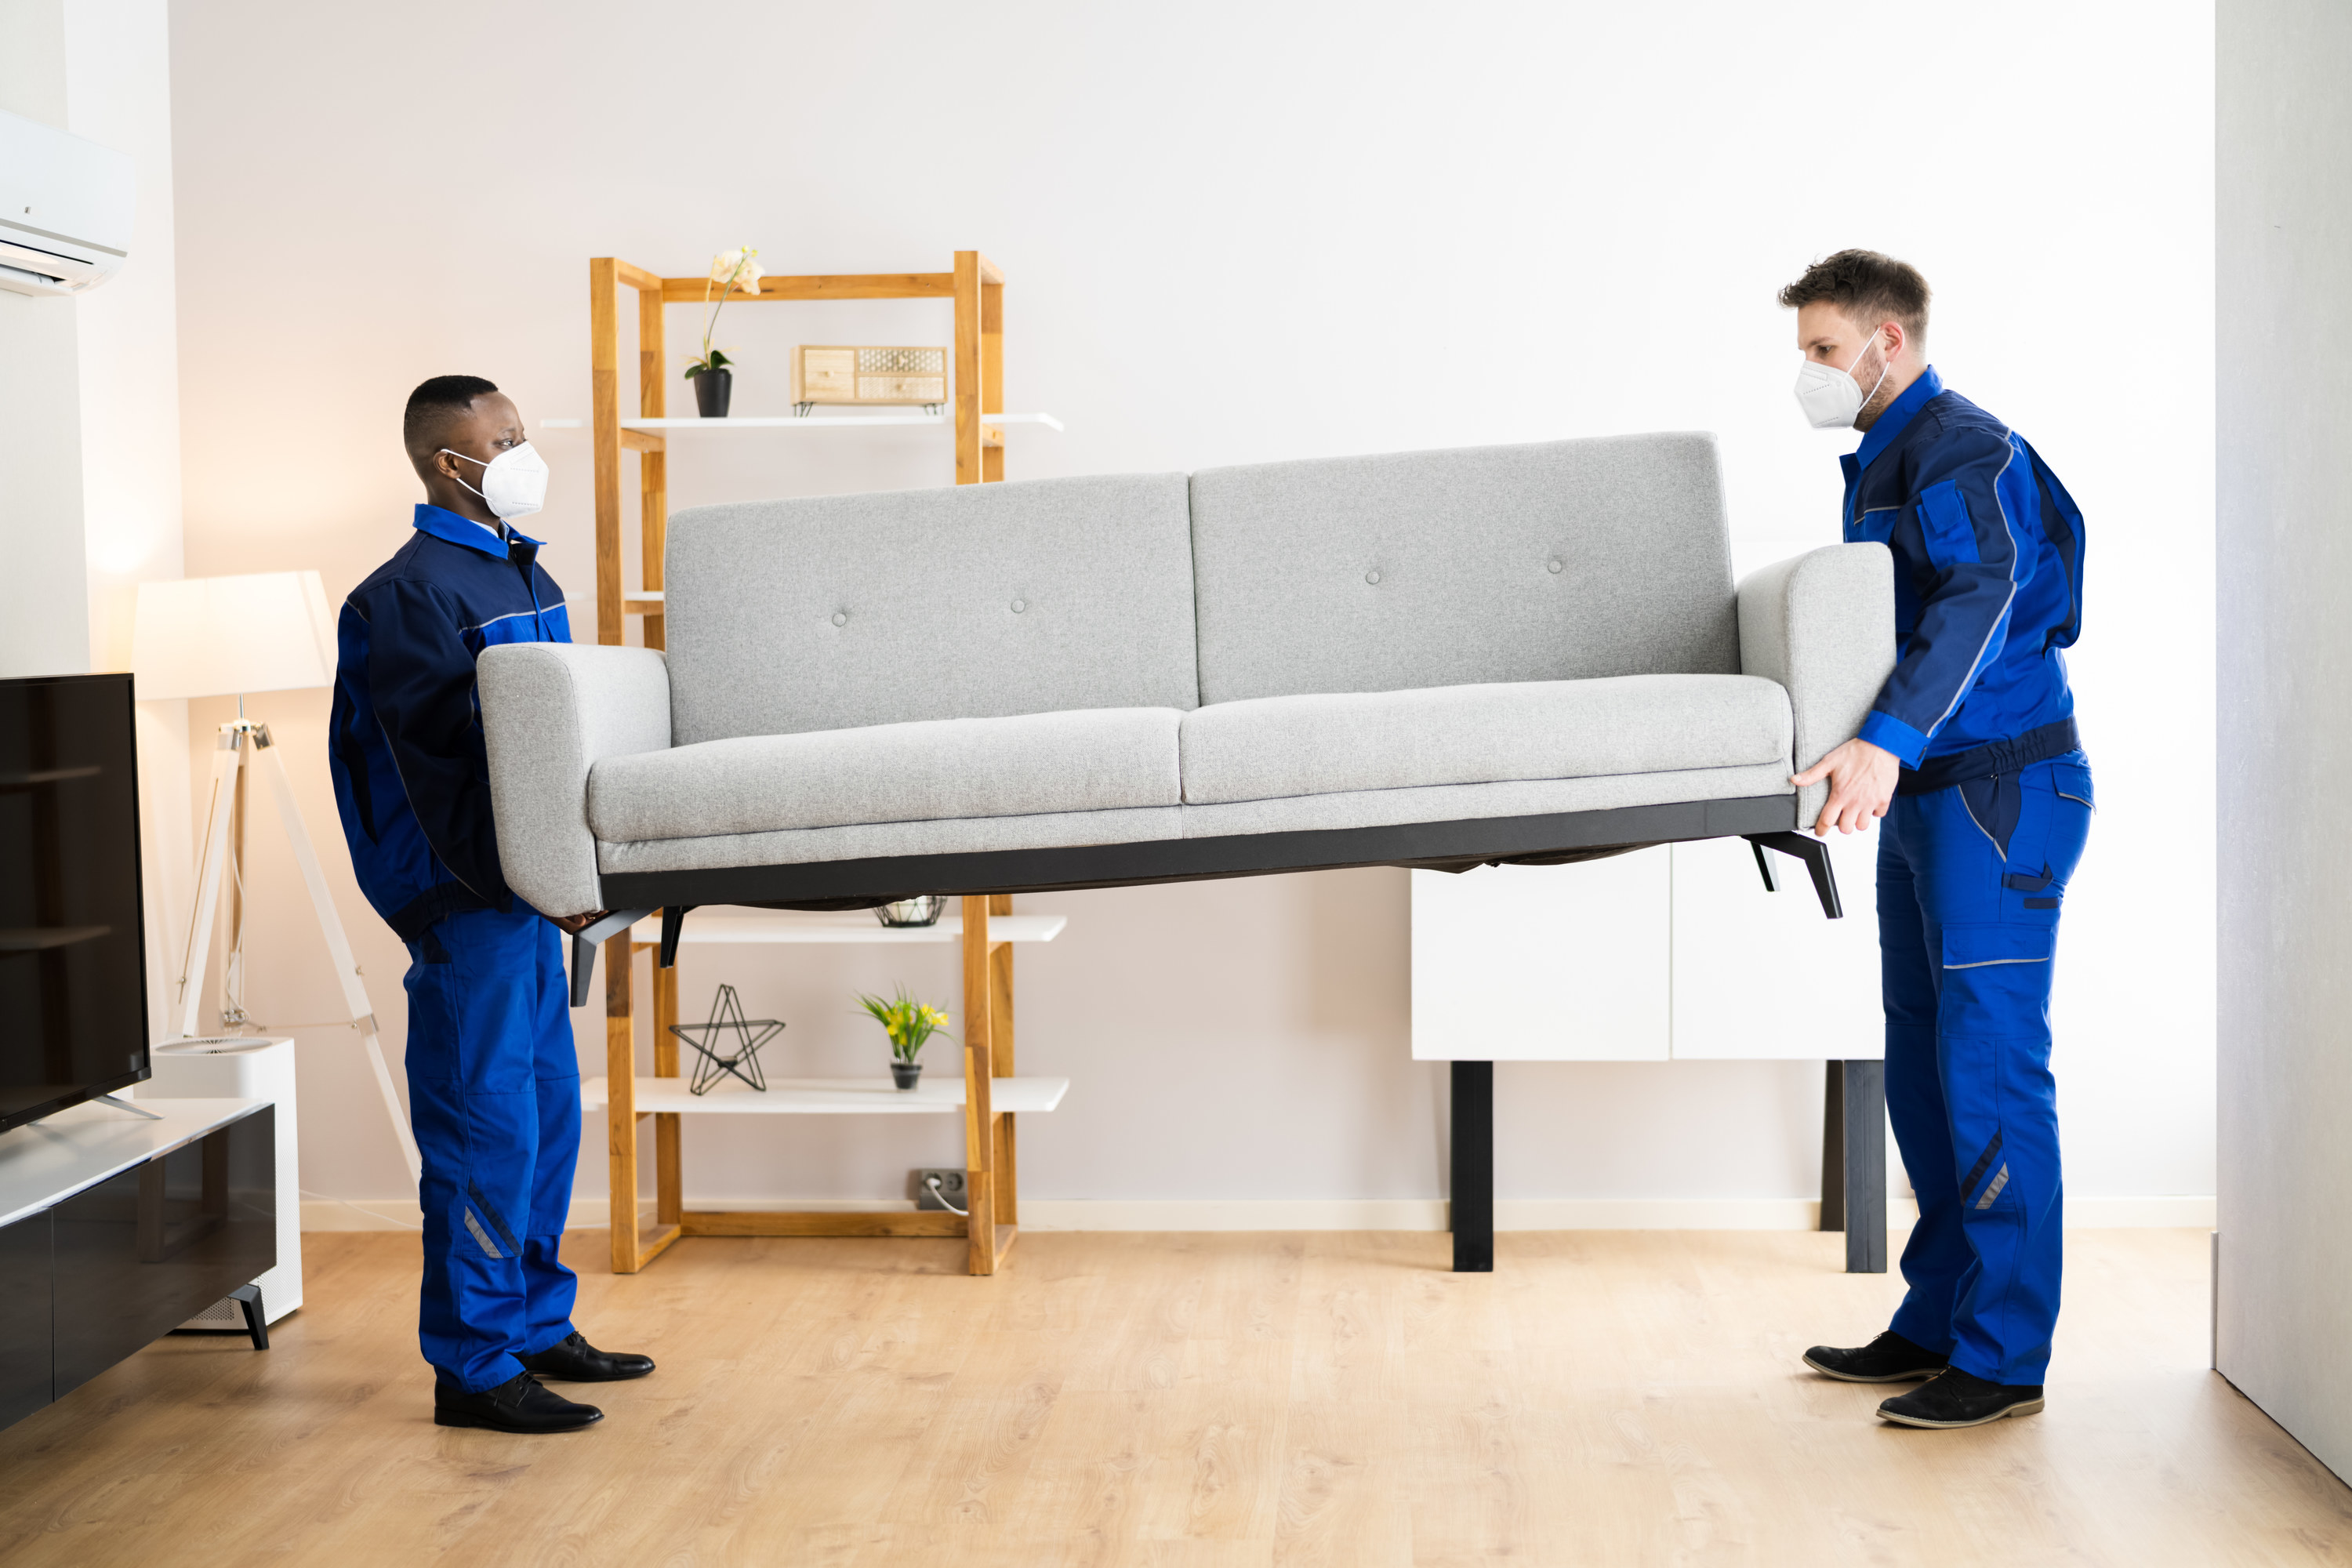 furniture movers lifting a couch wearing face masks